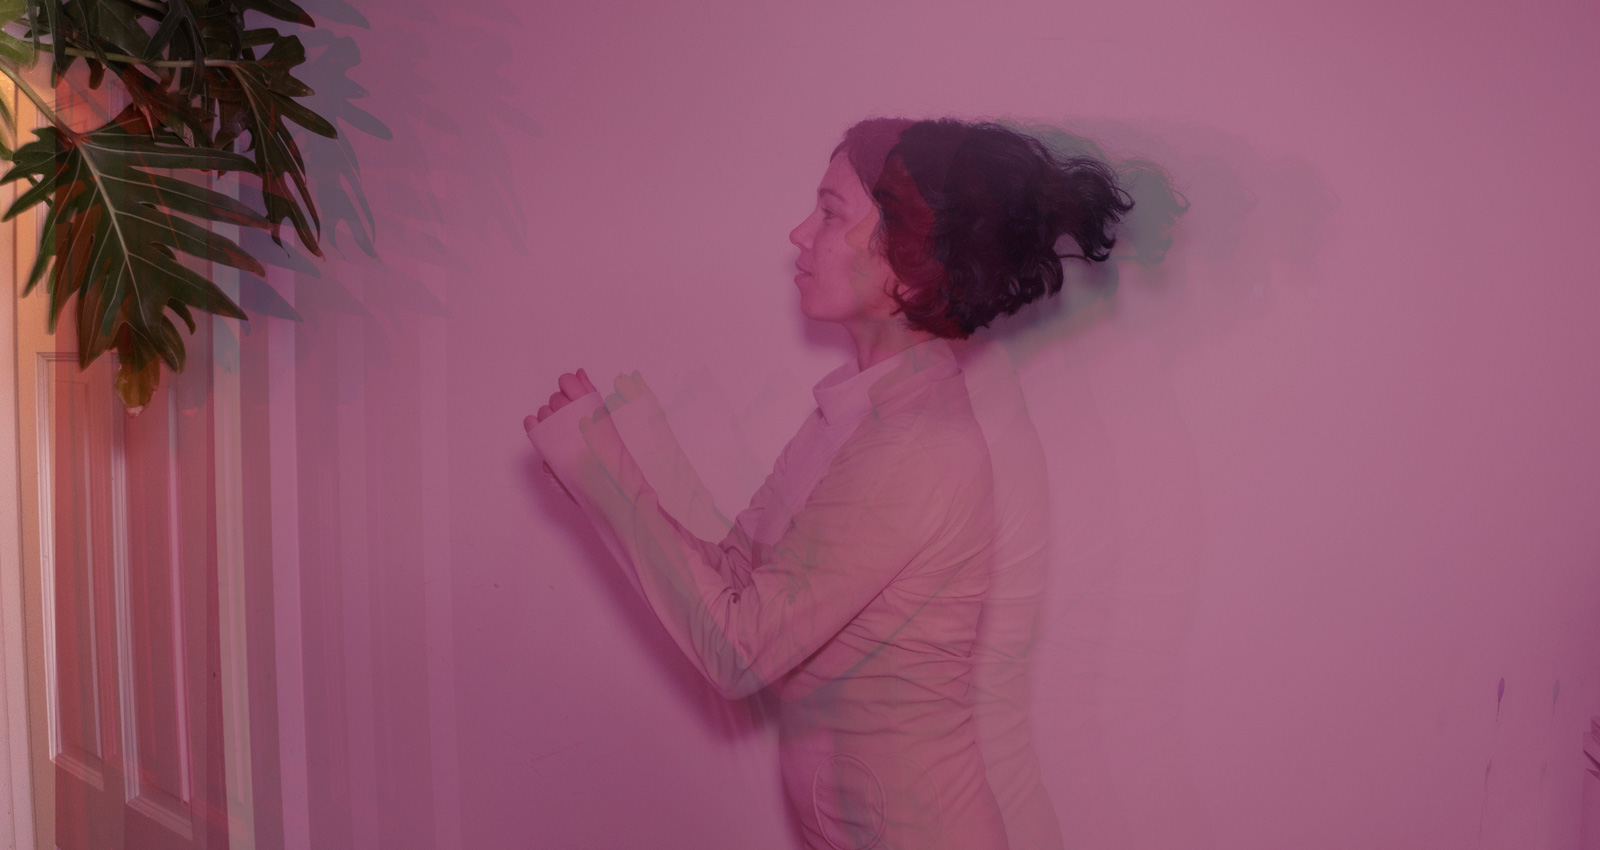 Kelly Lee Owens ‘Inner Song’ album out today